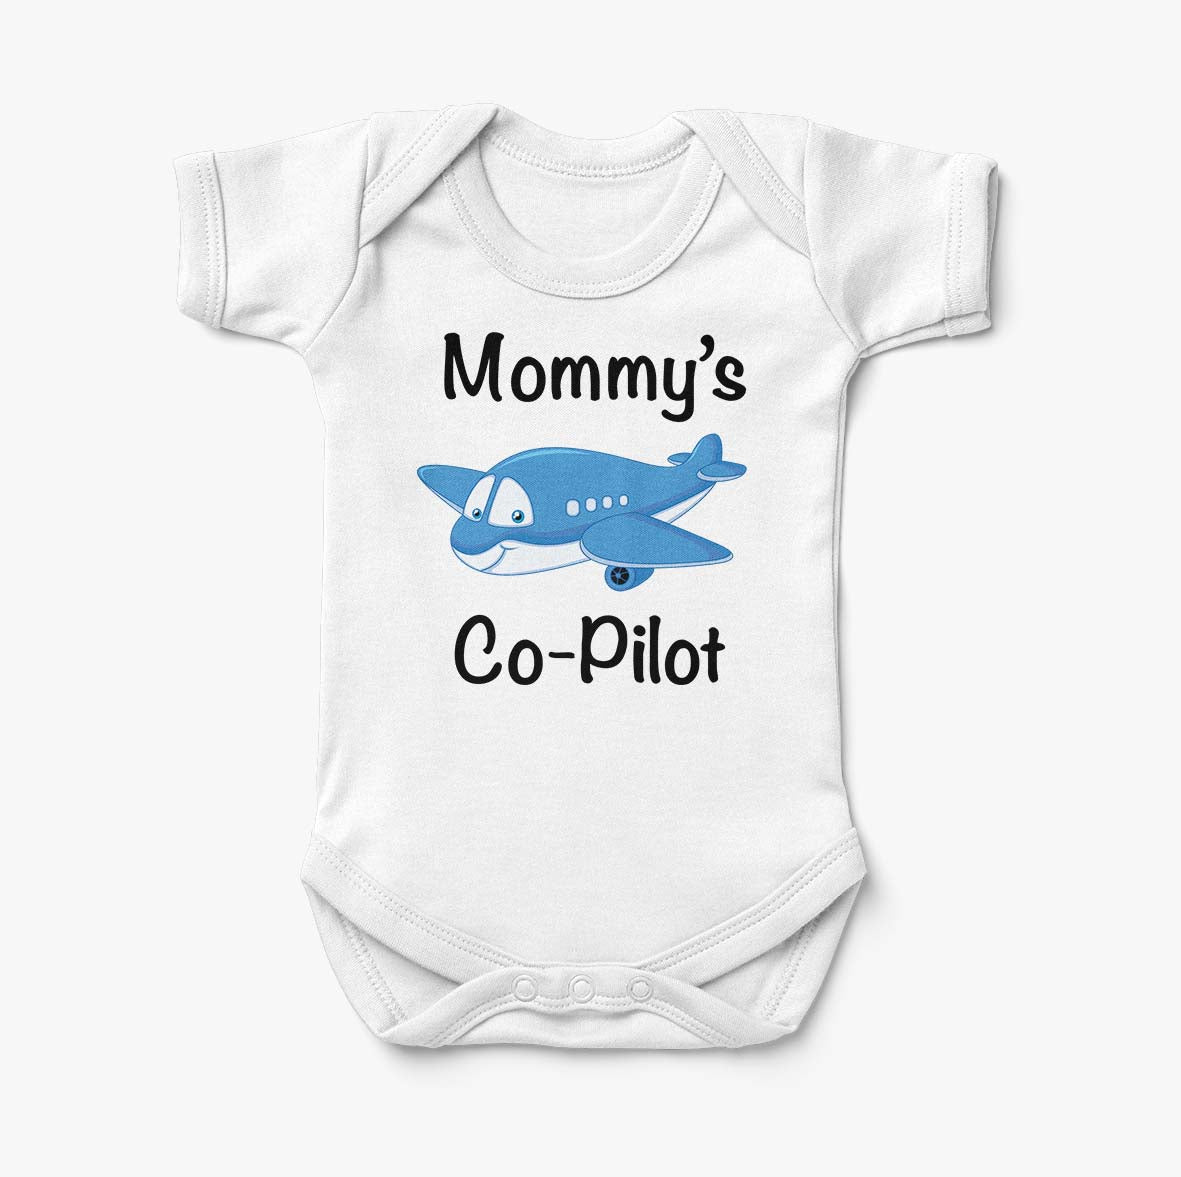 Mommy's Co-Pilot (Jet Airplane) Designed Baby Bodysuits